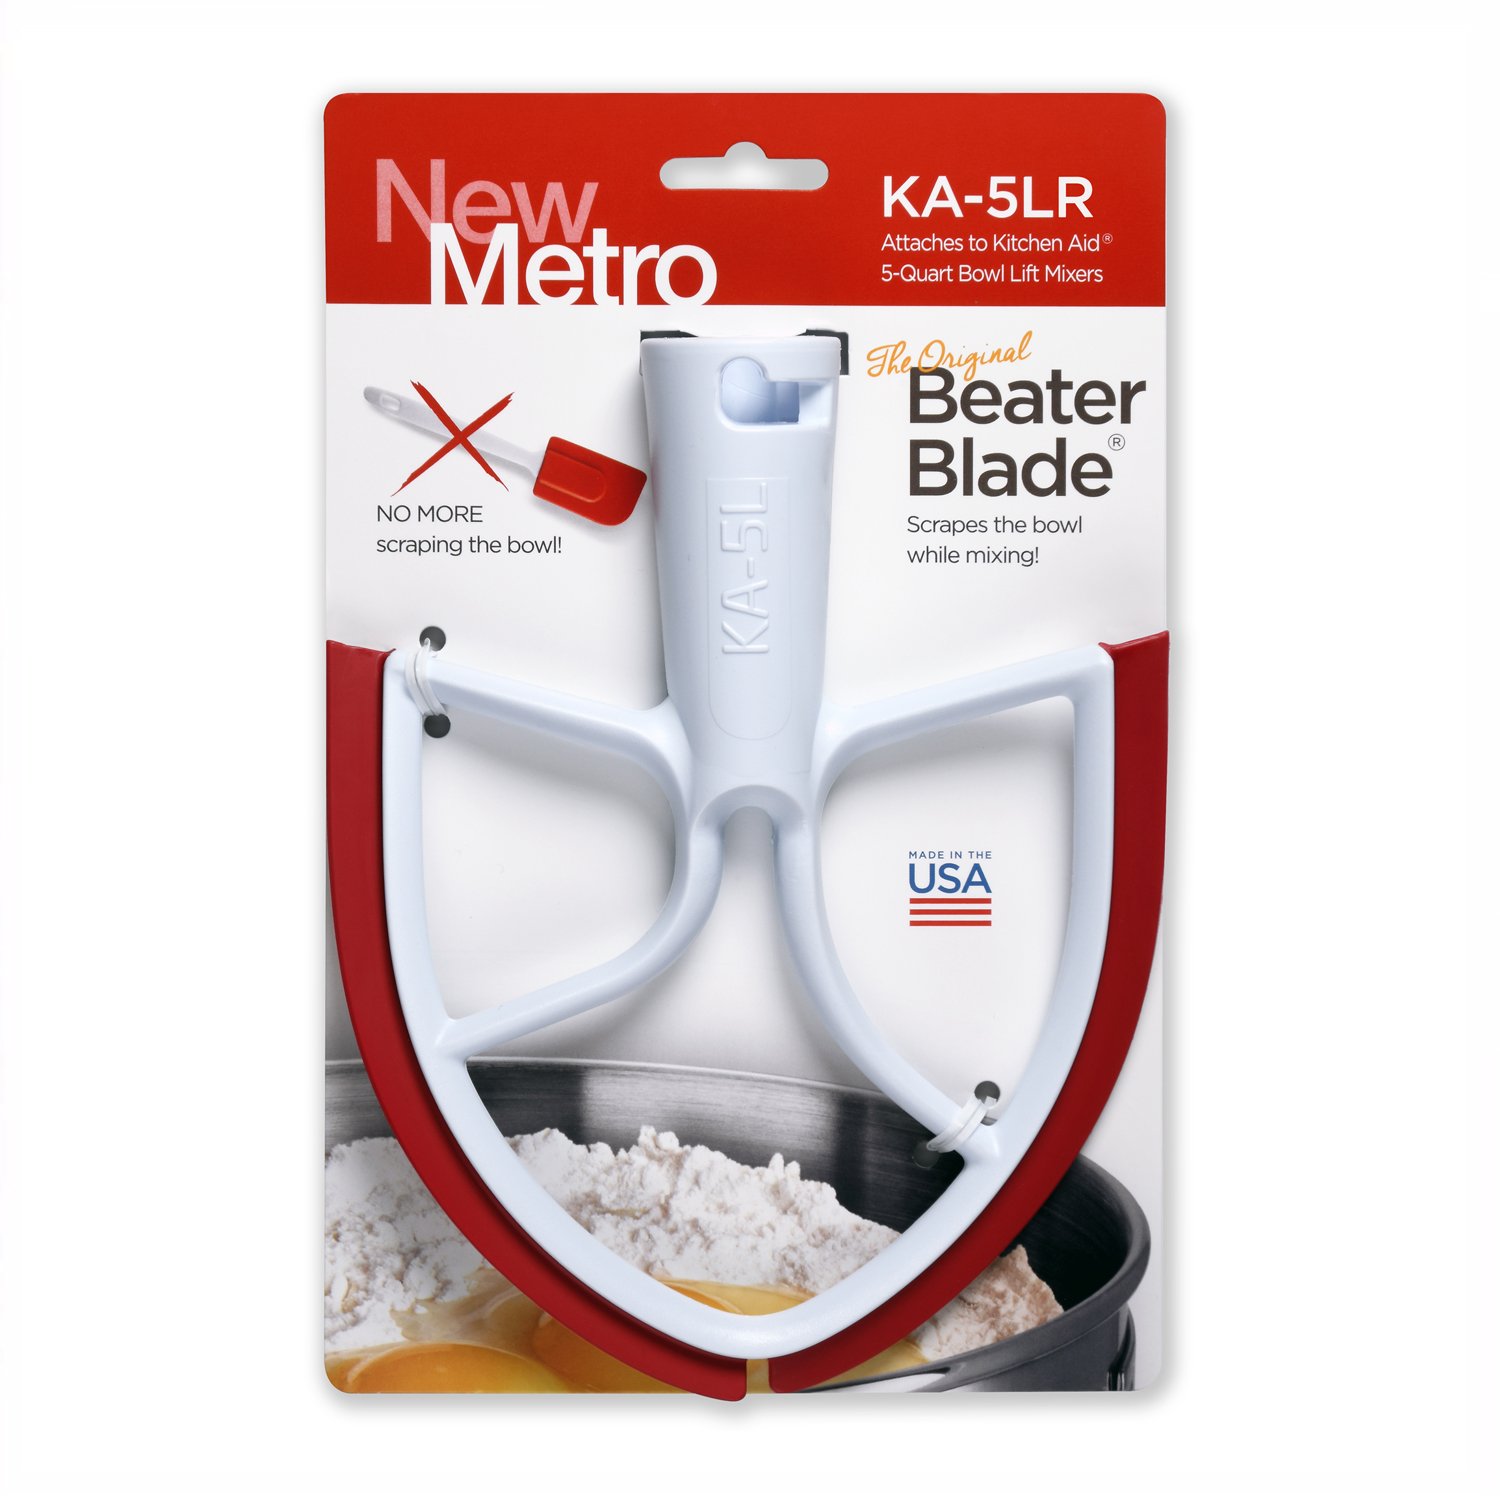  New Metro Design 5L-M Beater Blade METAL, Compatible With Most  KitchenAid 5 Quart Bowl-Lift Stand Mixers, Black : Everything Else